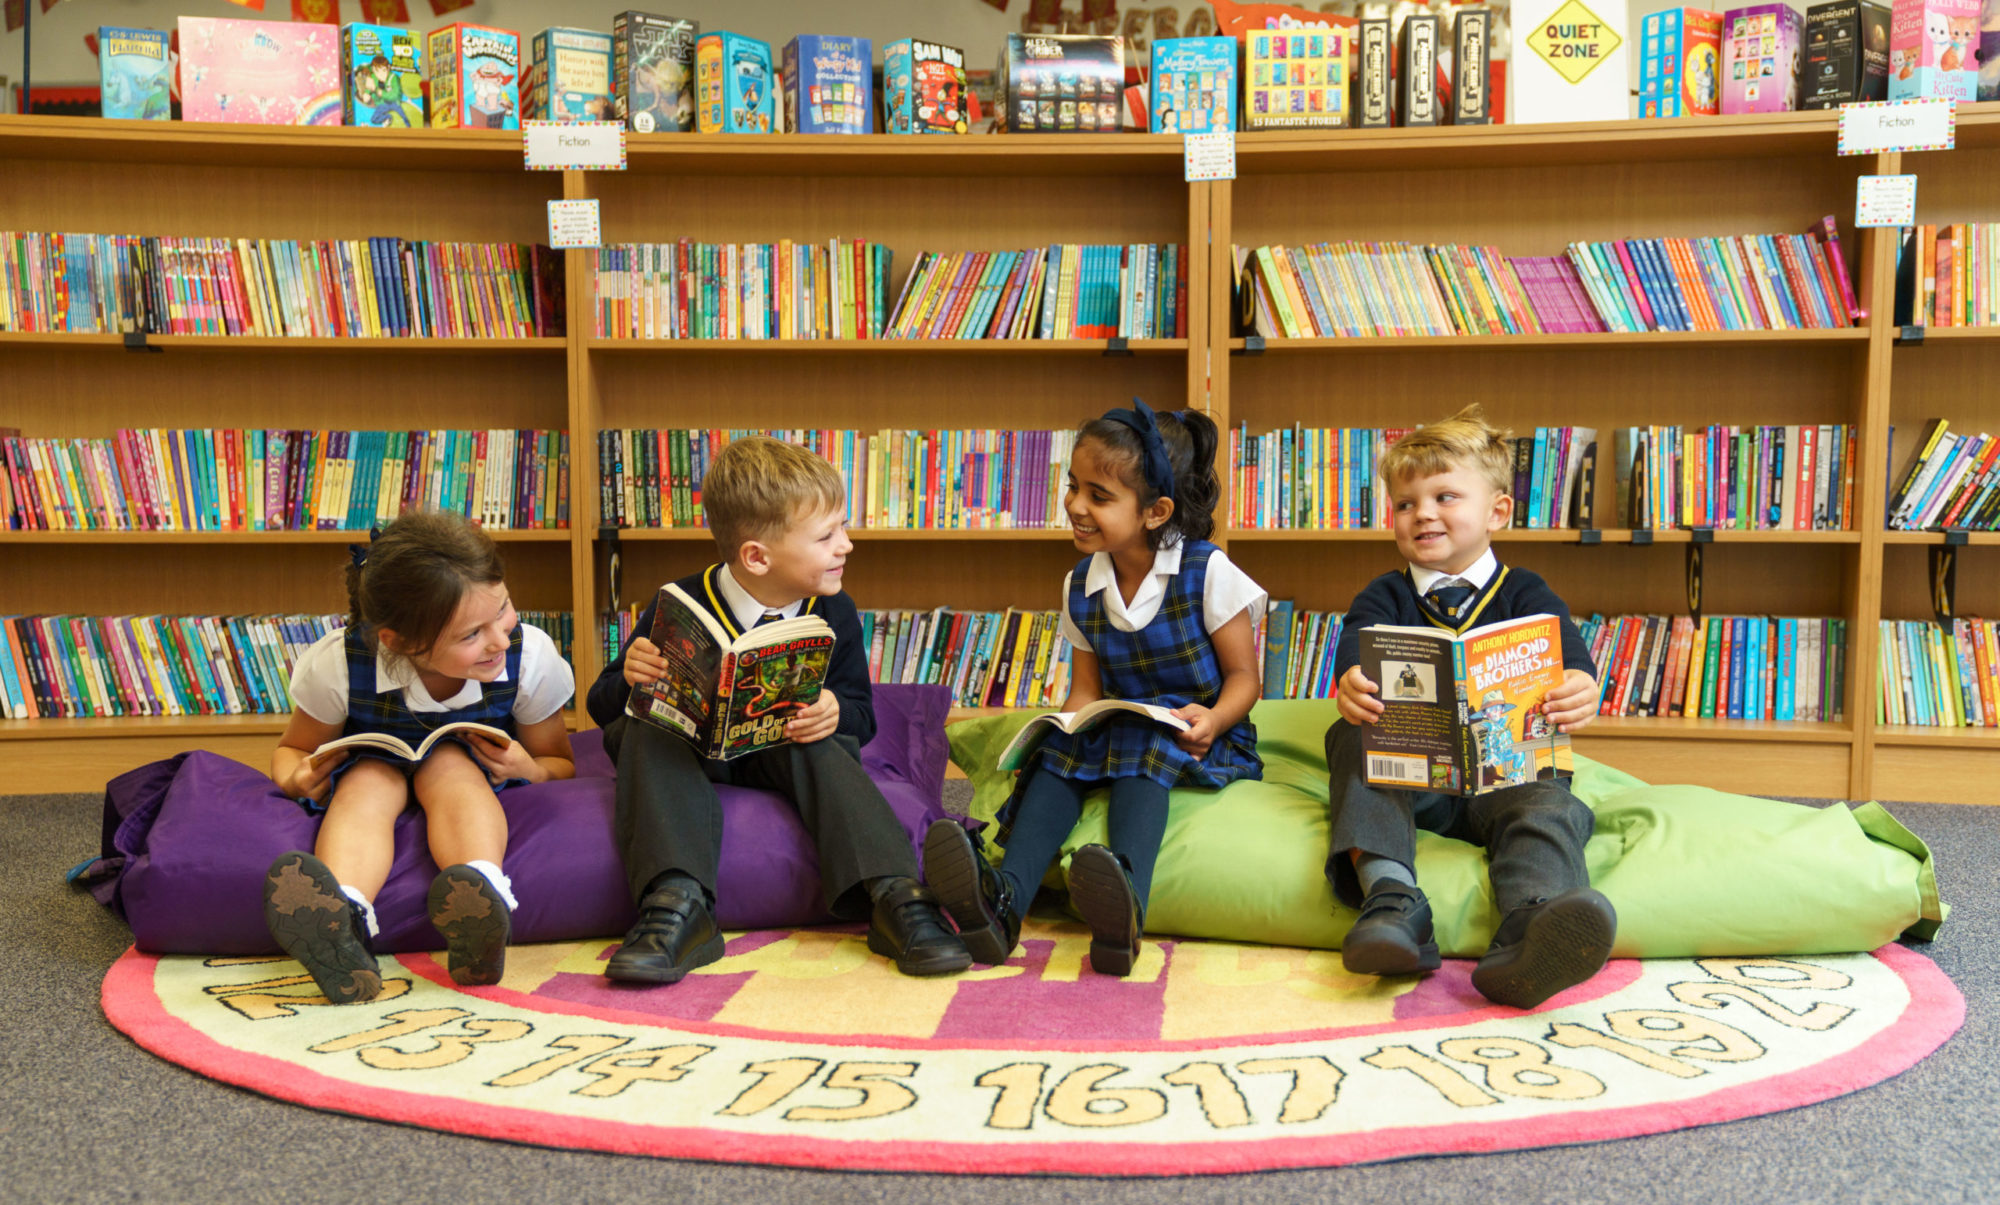 Four reception-age students of Ratcliffe College sat on beanbags, reading books and smiling